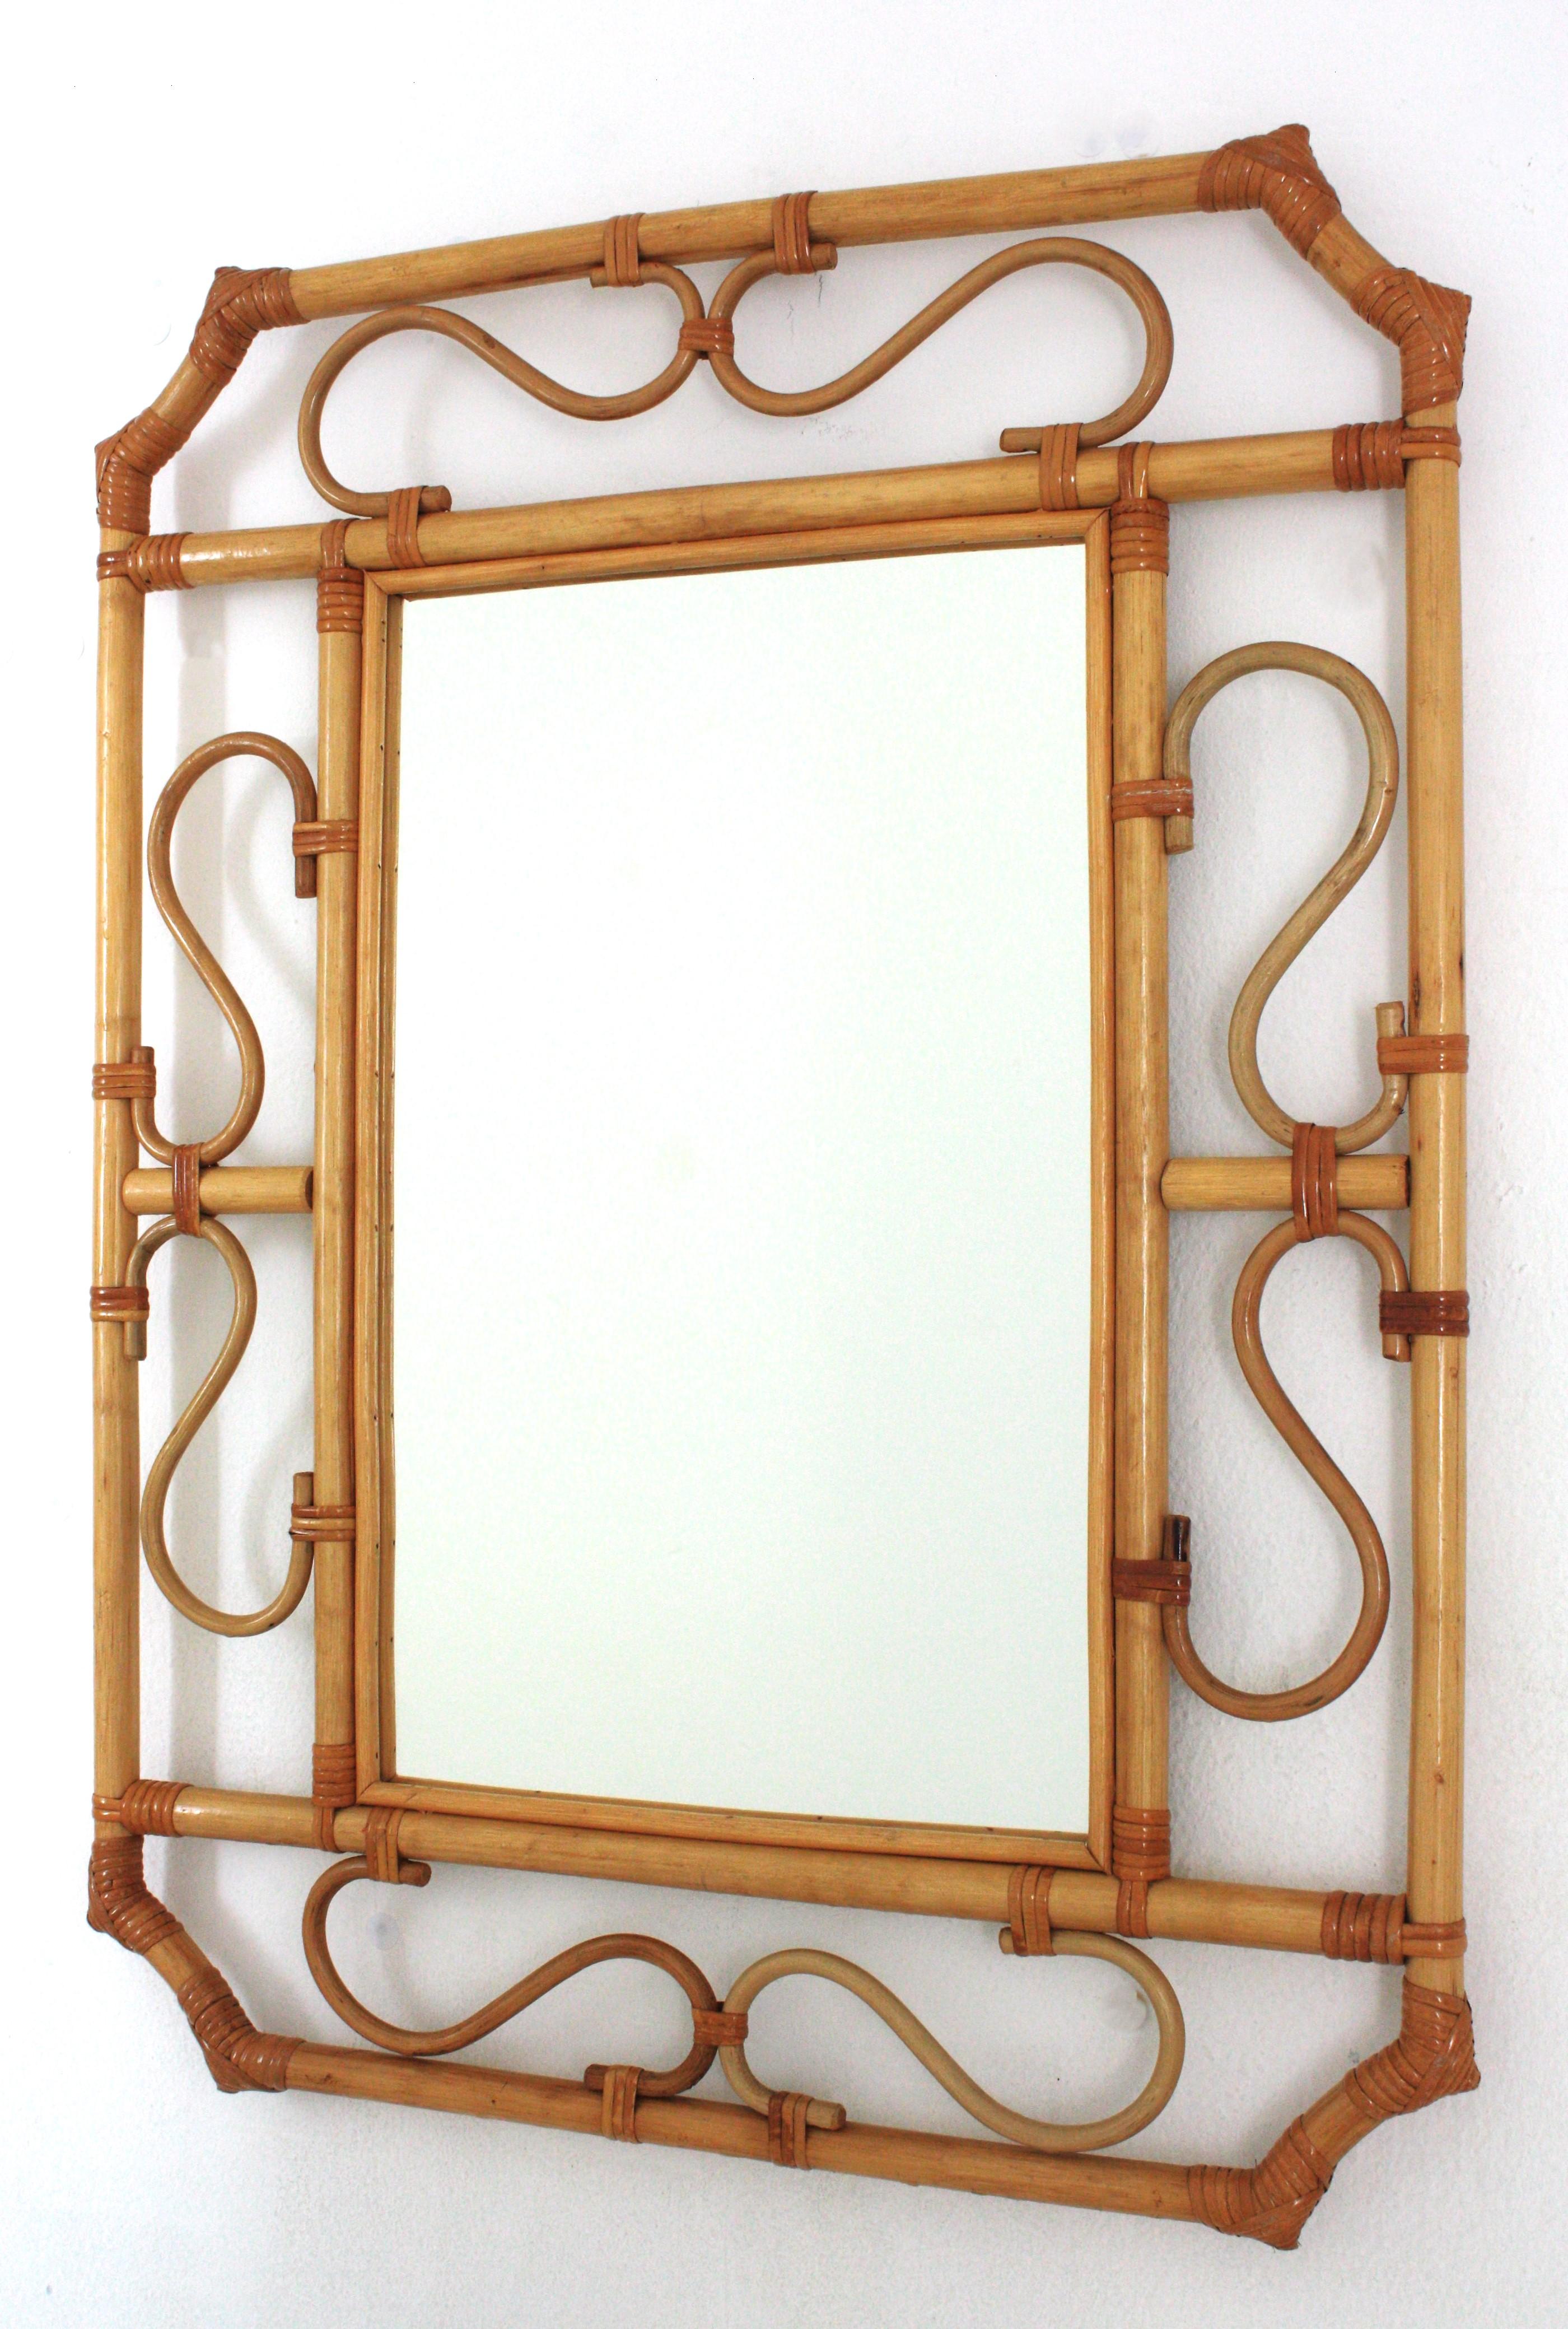 Hand-Crafted Franco Albini Style Rattan Octagonal Mirror, Italy, 1960s For Sale